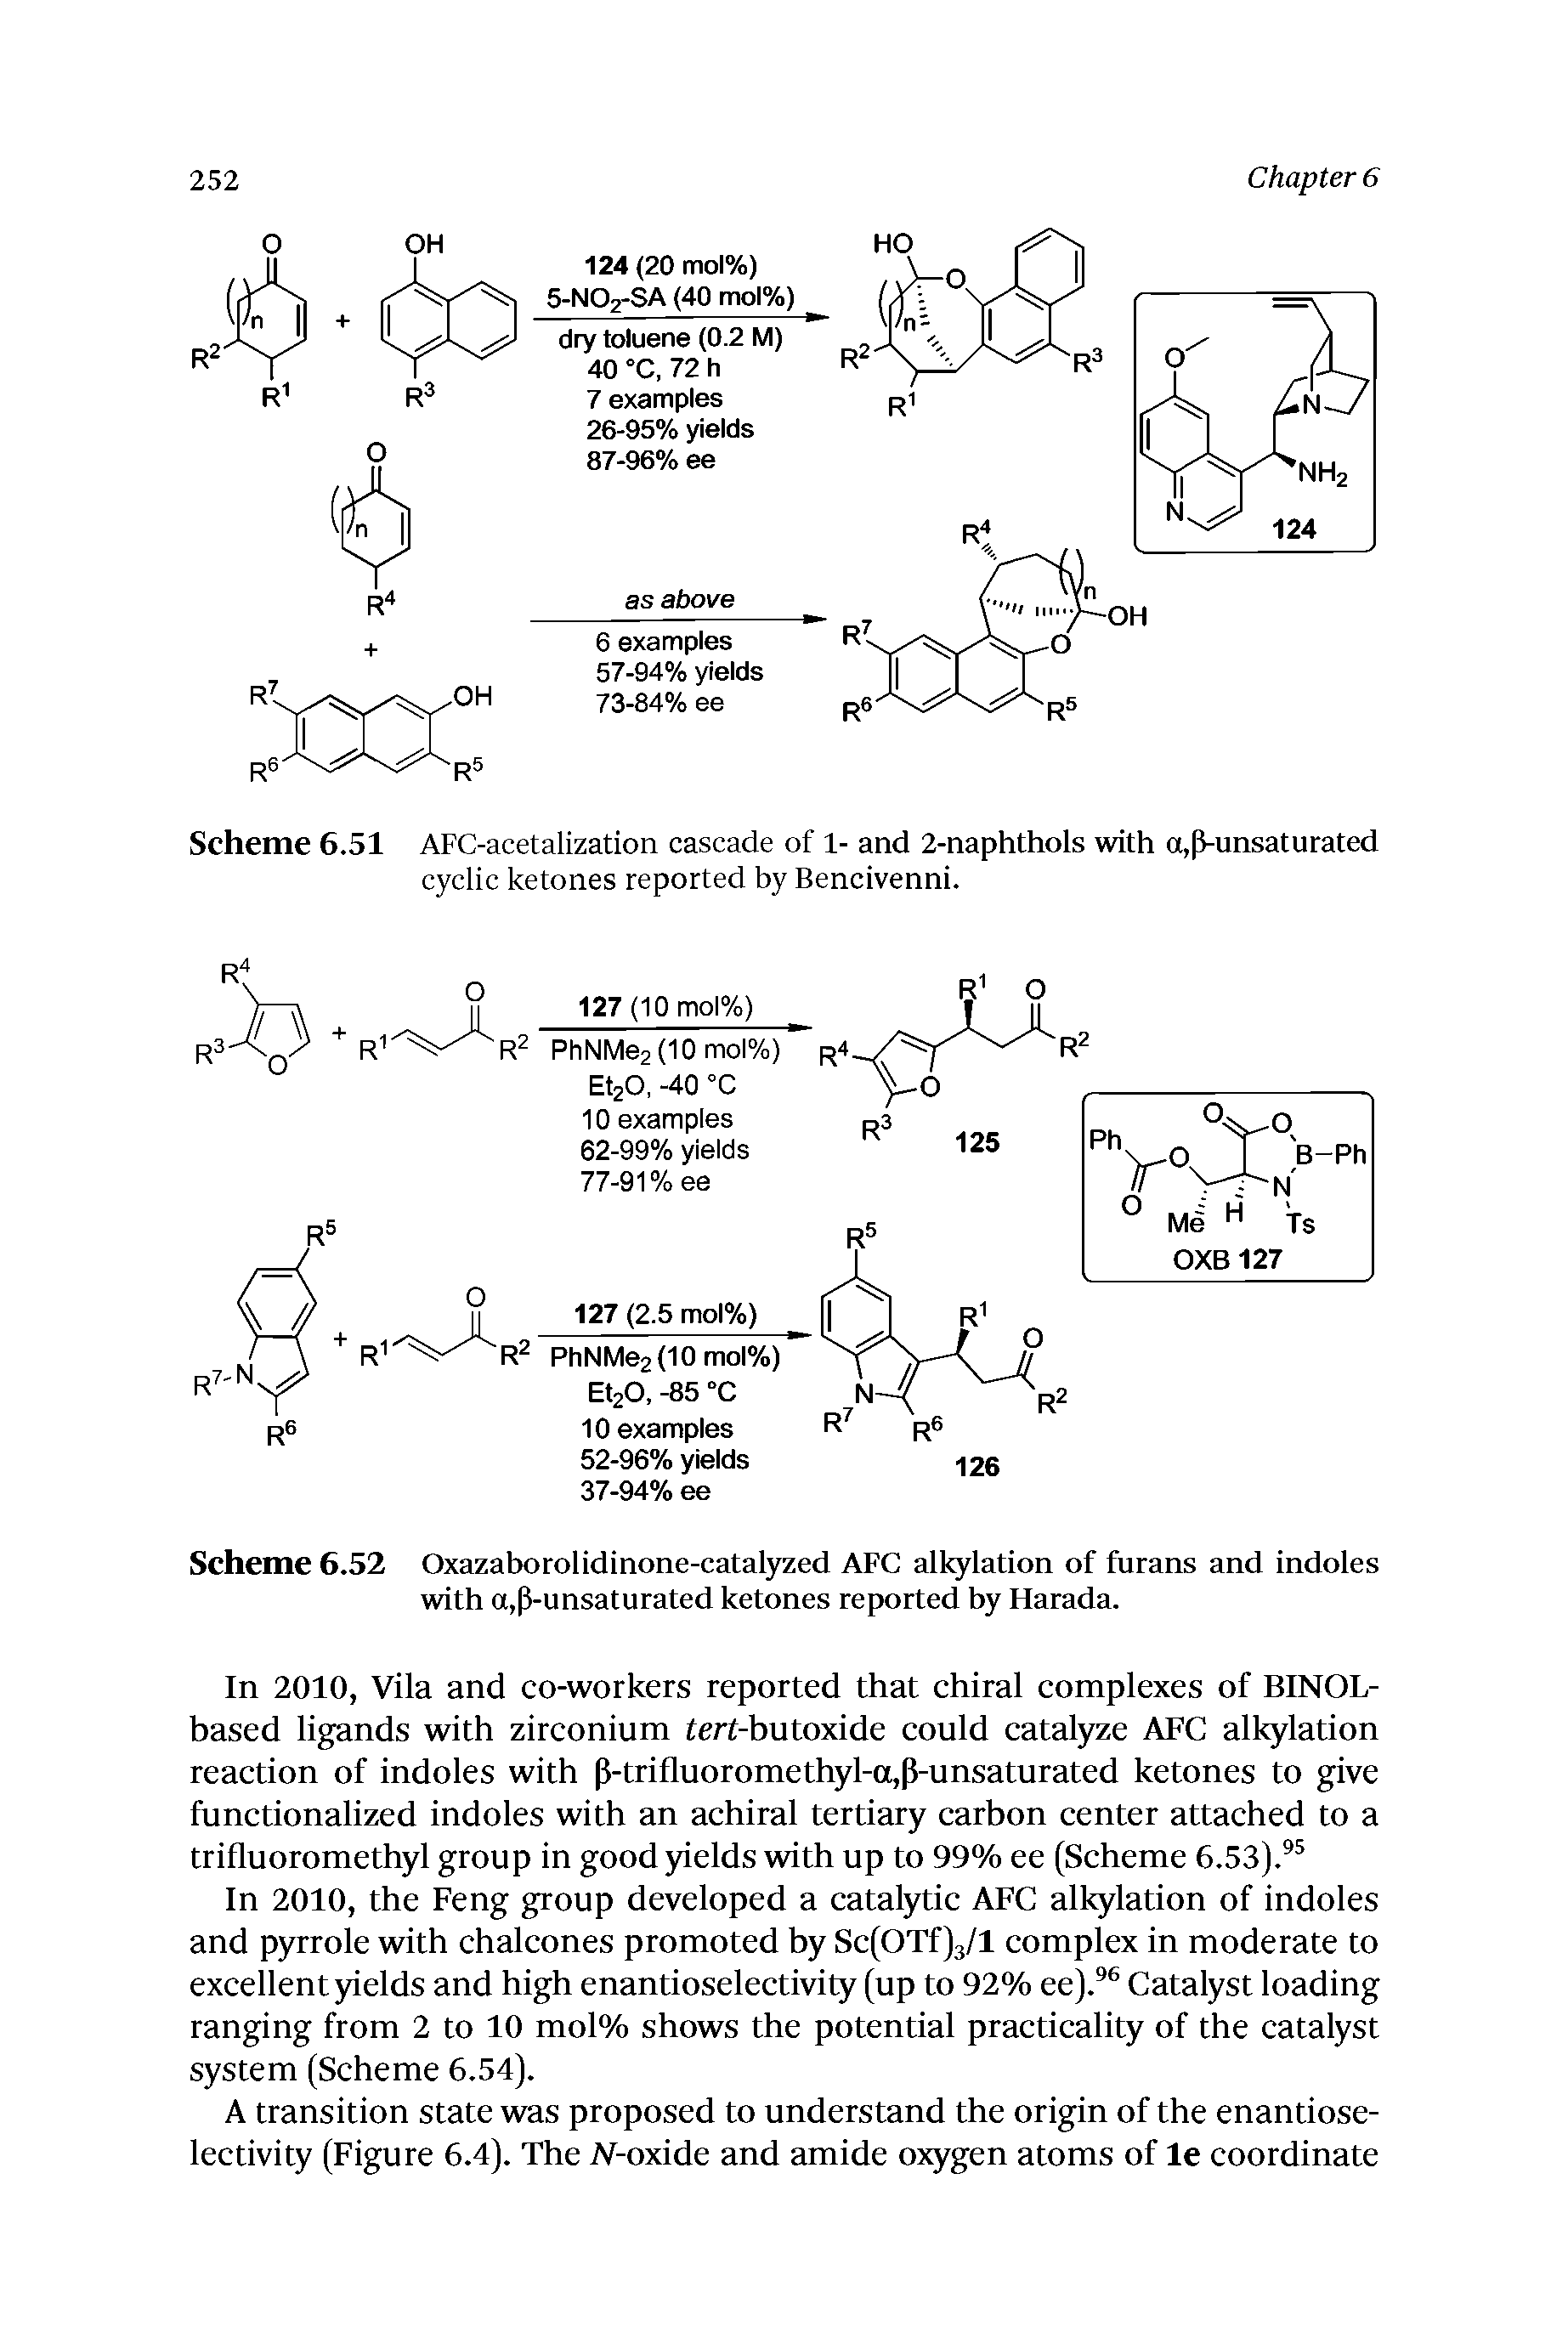 Scheme 6.51 AFC-acetalization cascade of 1- and 2-naphthols with a,(3-unsaturated cyclic ketones reported by Bencivenni.